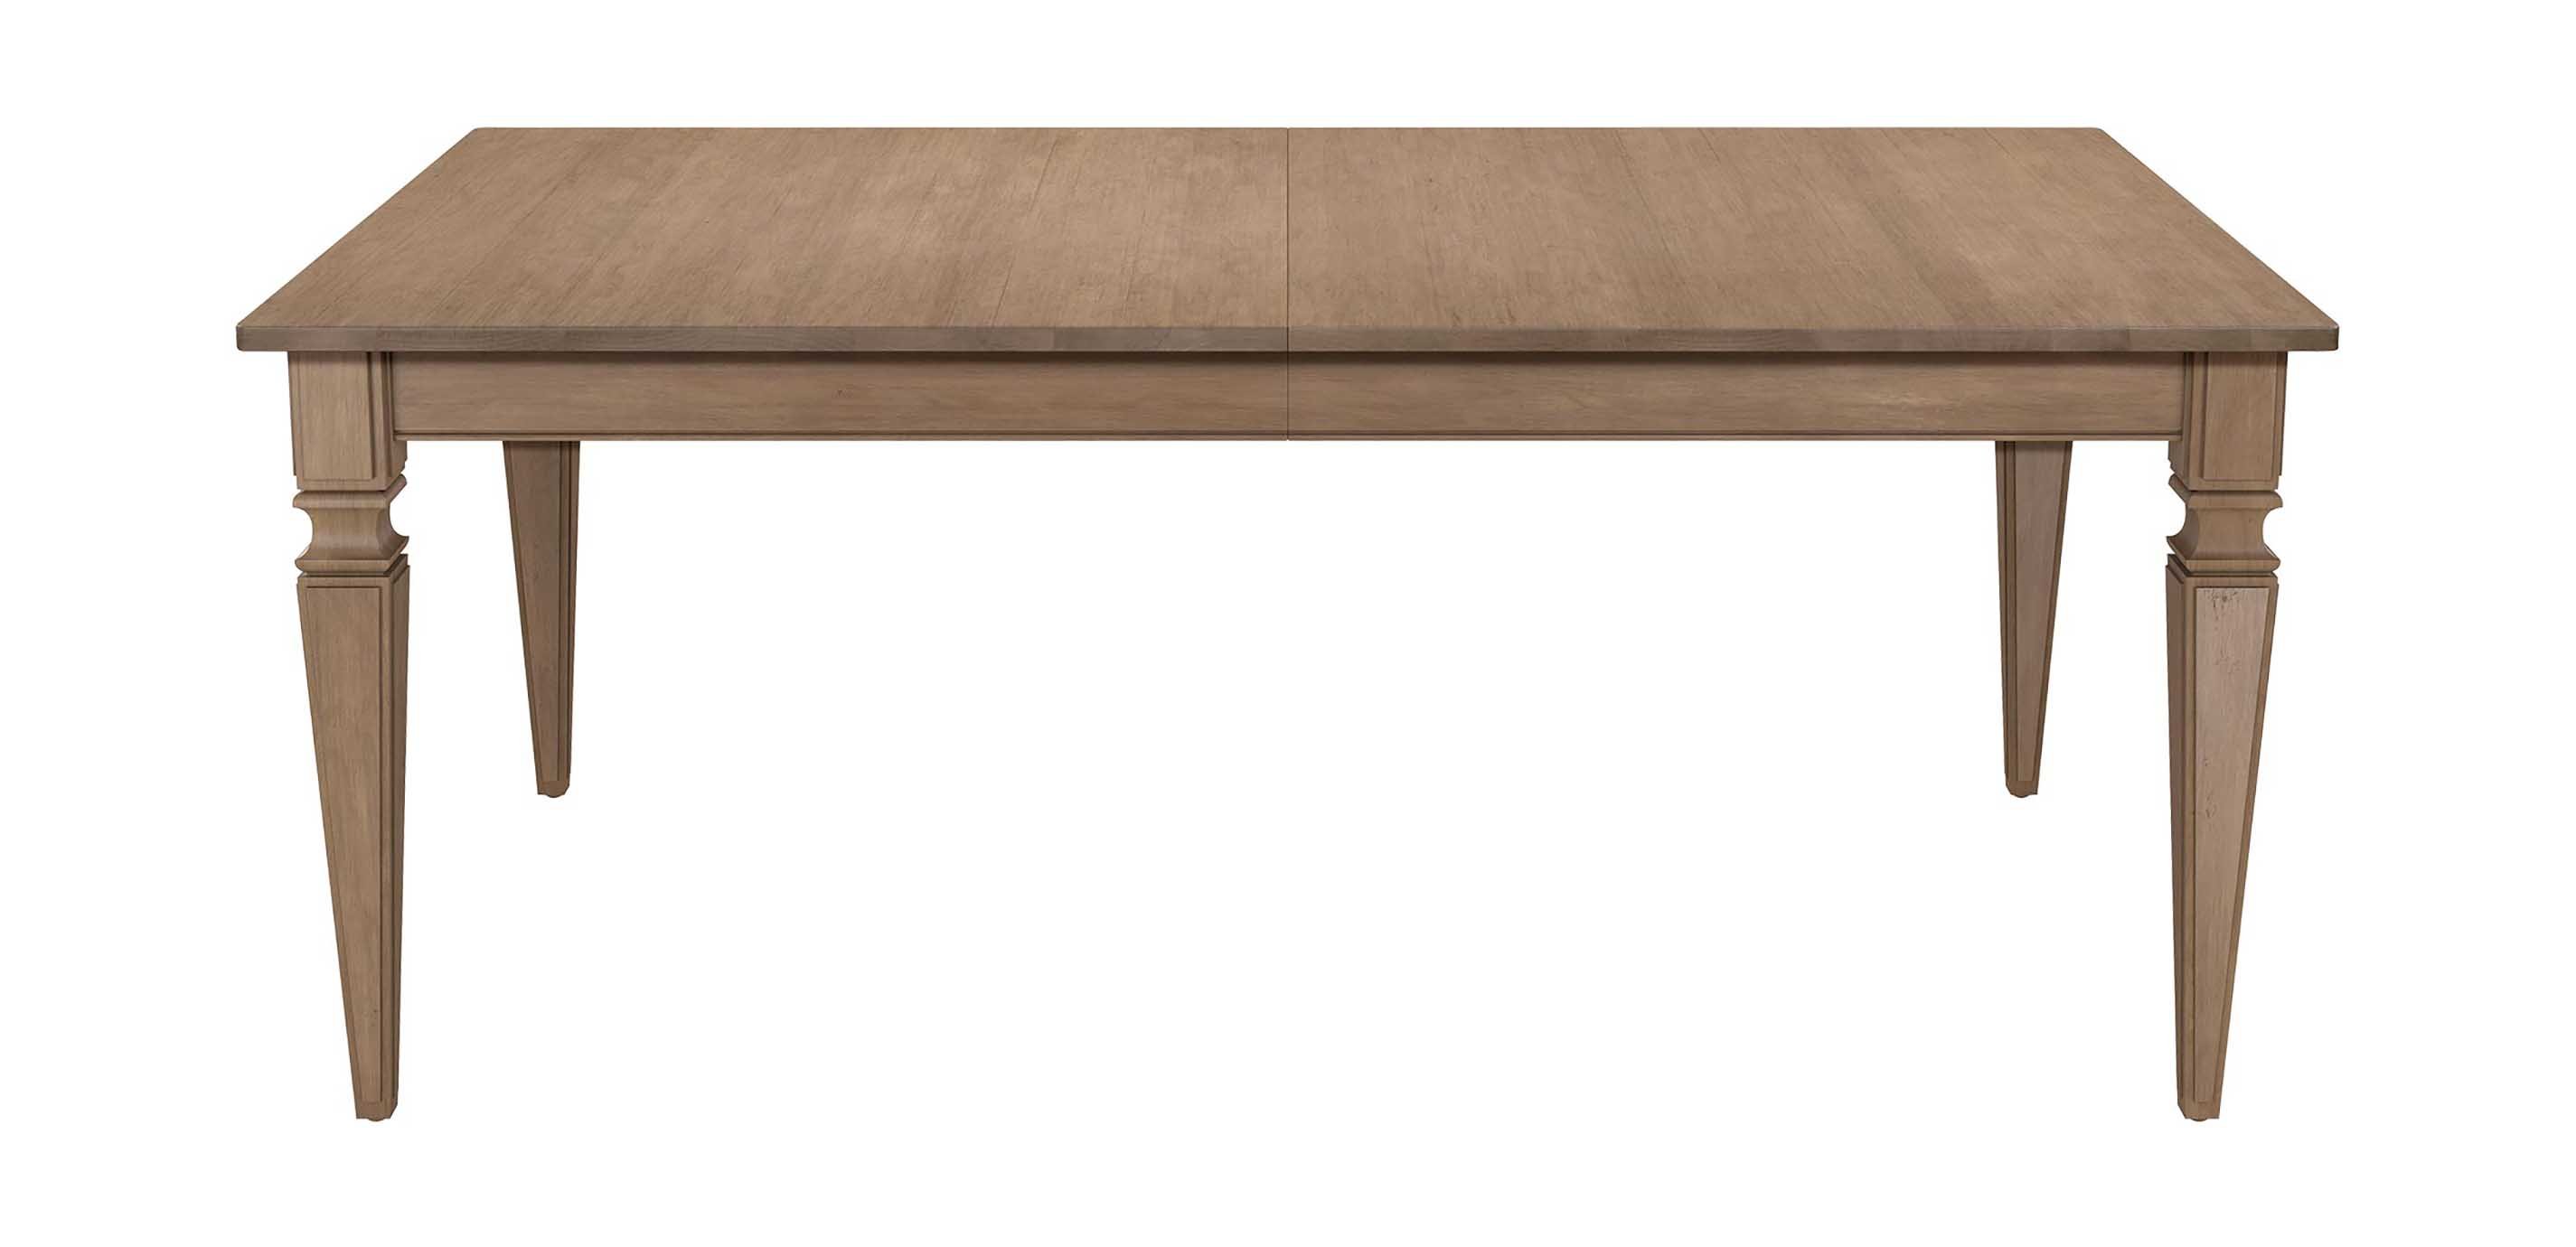 Custom Extension Dining Table Extendable Table Ethan Allen